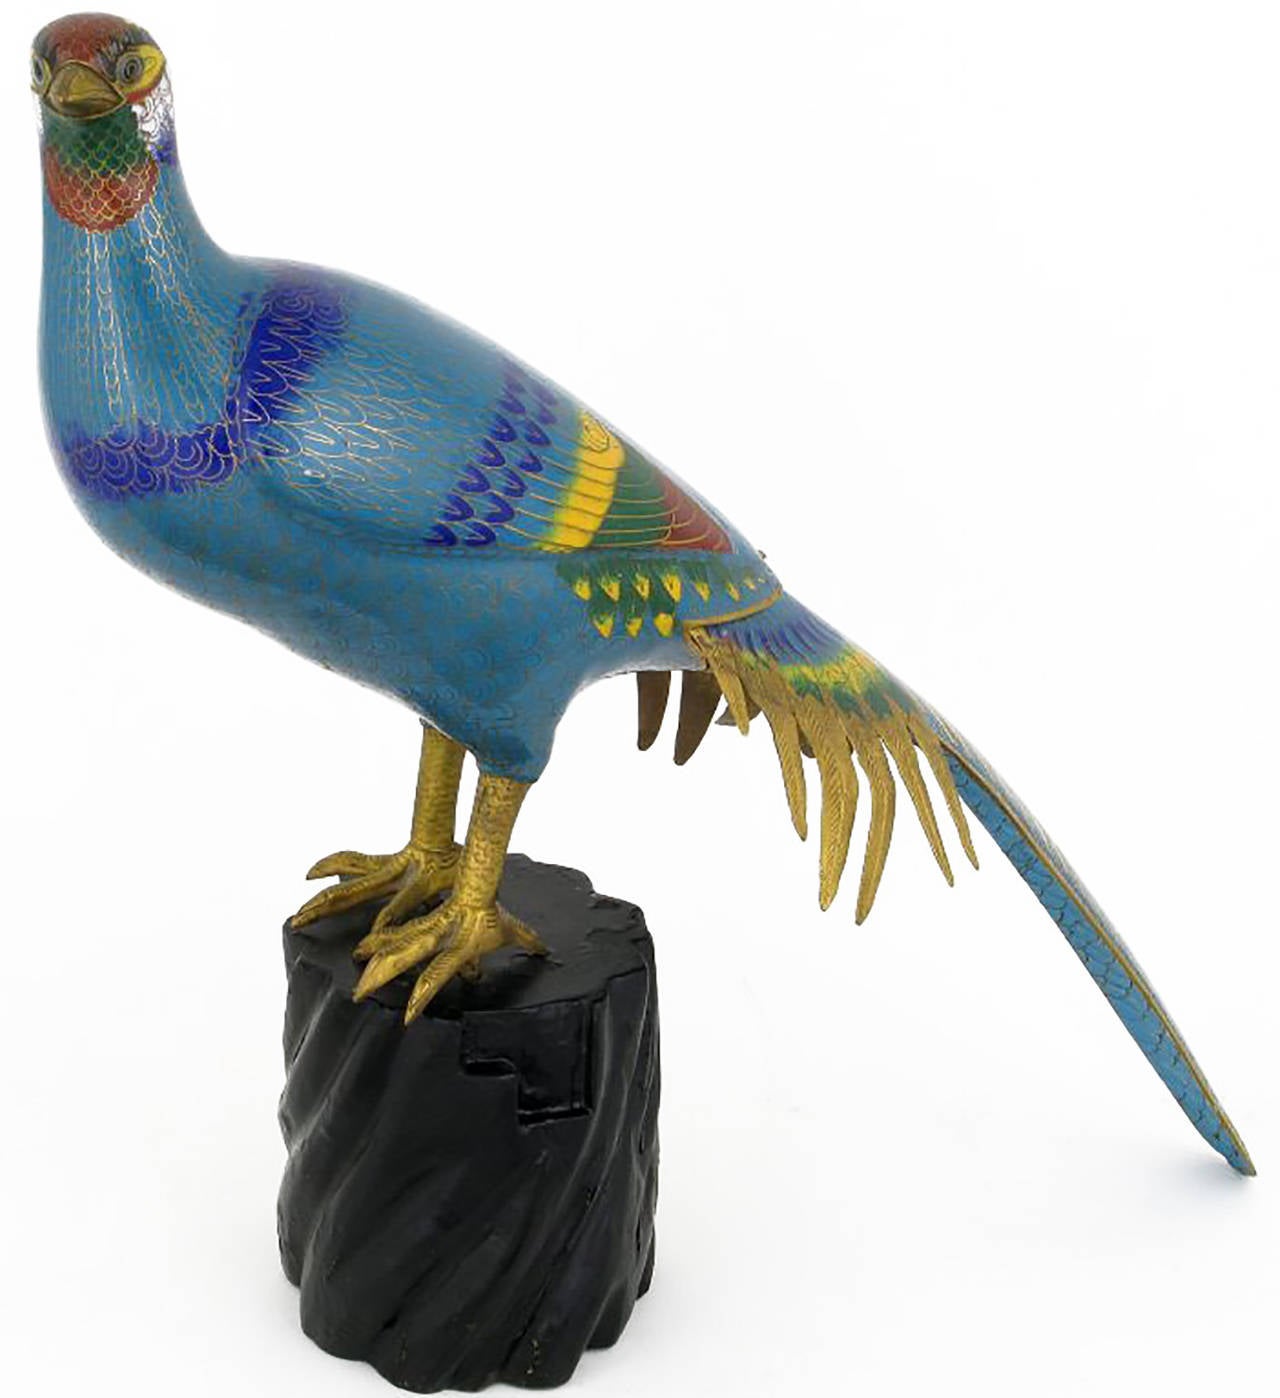 A wonderful and large cloisonne pheasant in beautiful shades of blue, yellow, red and green inlaid enamel, surmounted on a carved and ebonized wood base.